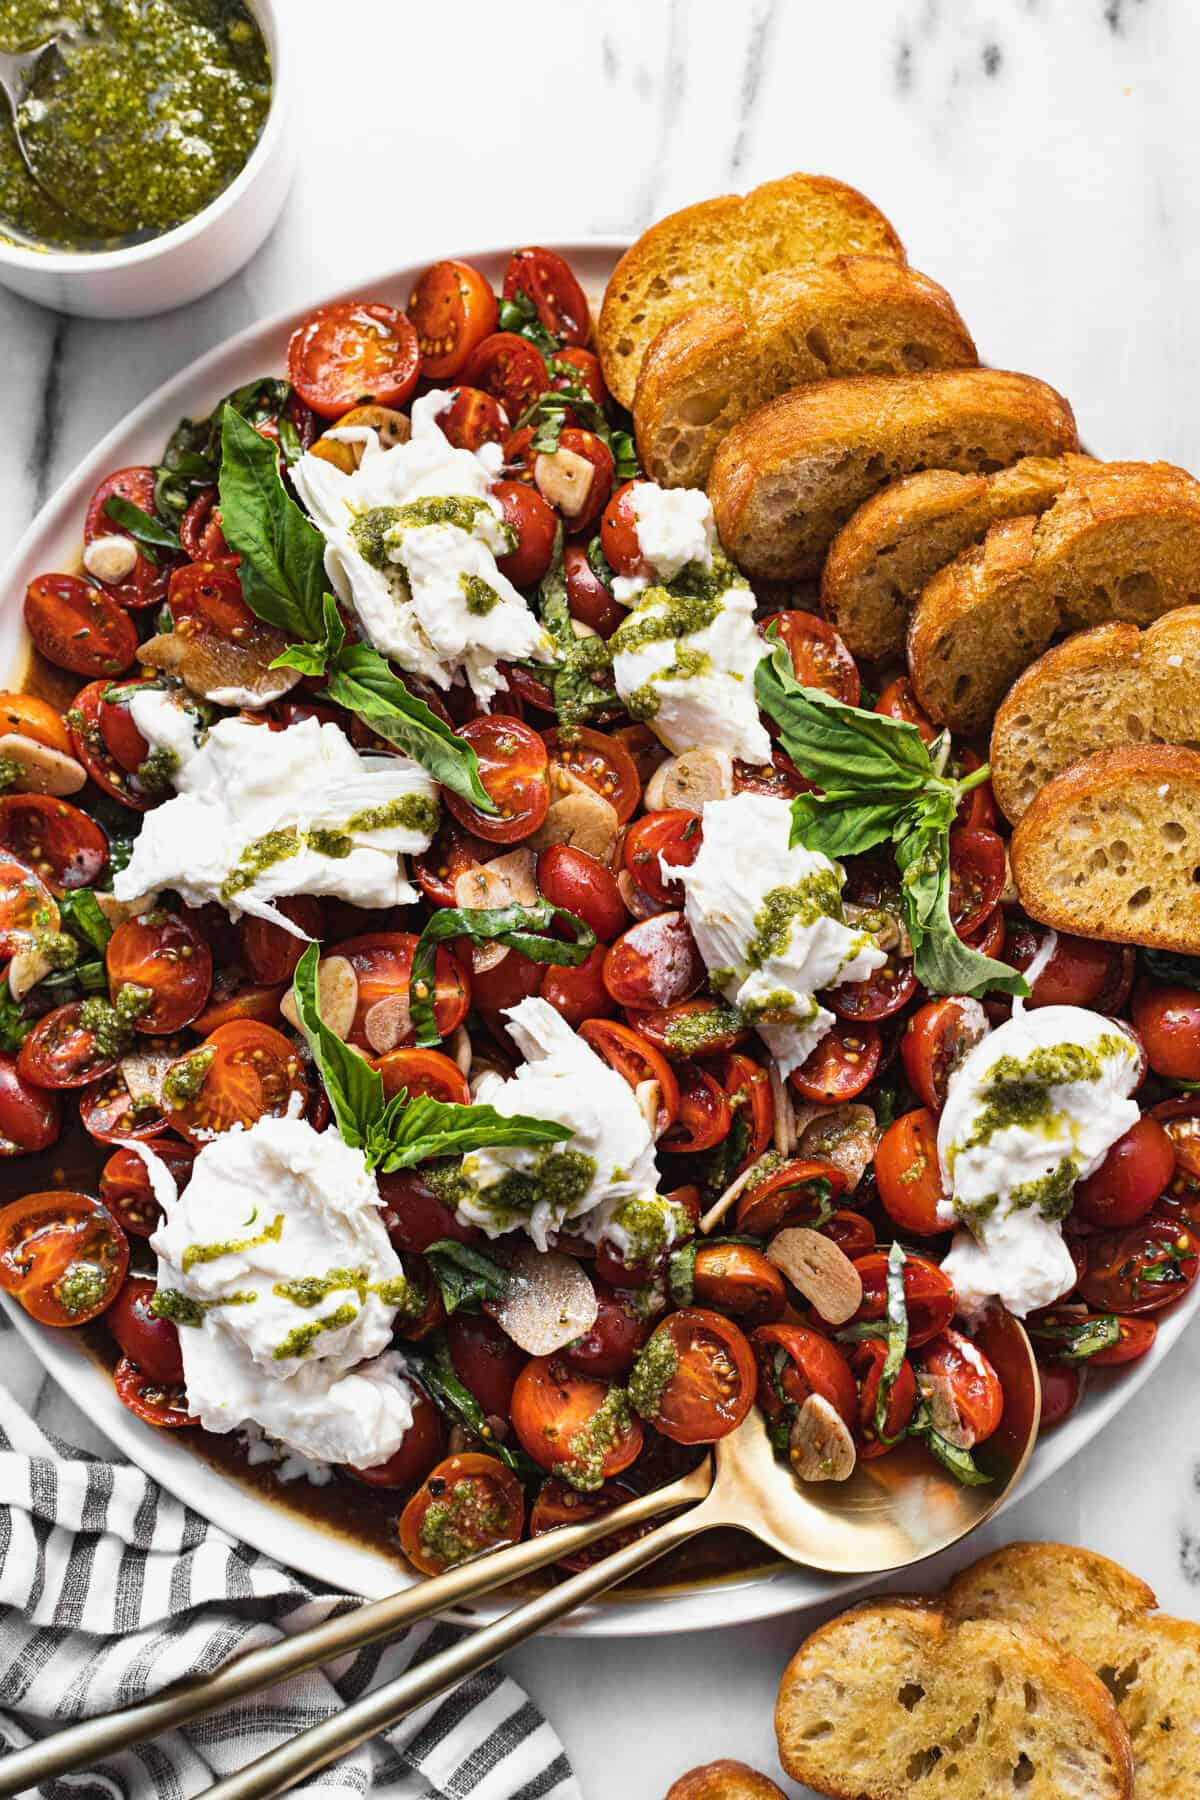 Large white plate with sliced tomatoes and burrata salad with crostini.